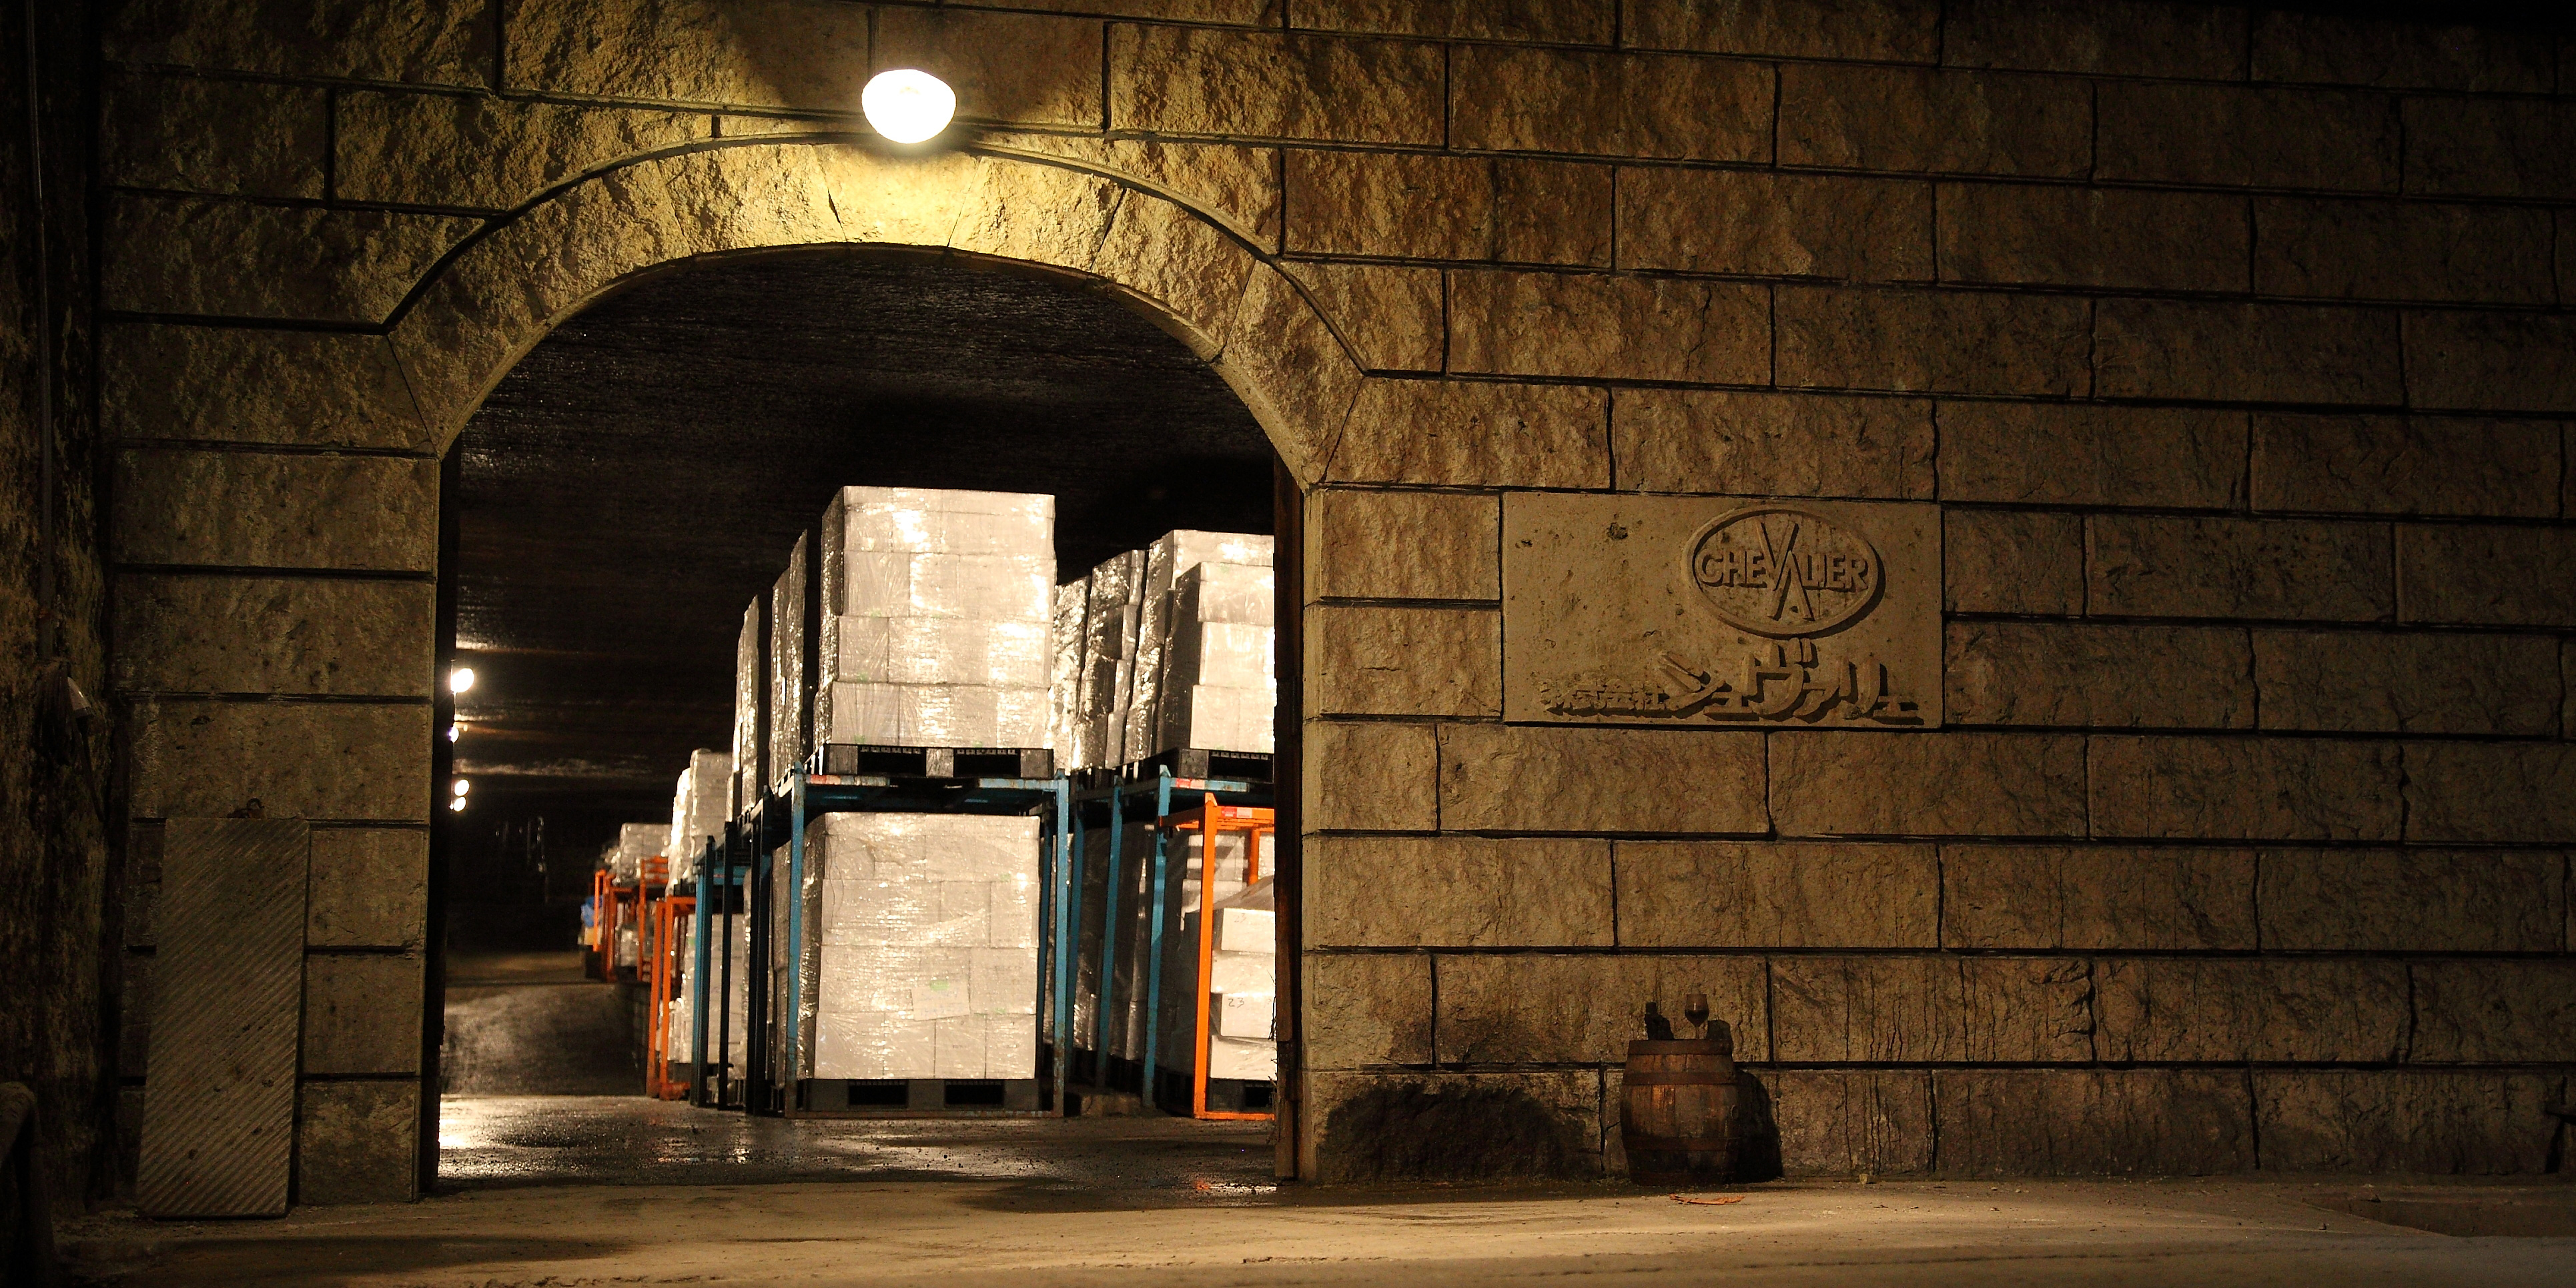 The stone warehouse that was adored by the god of wine